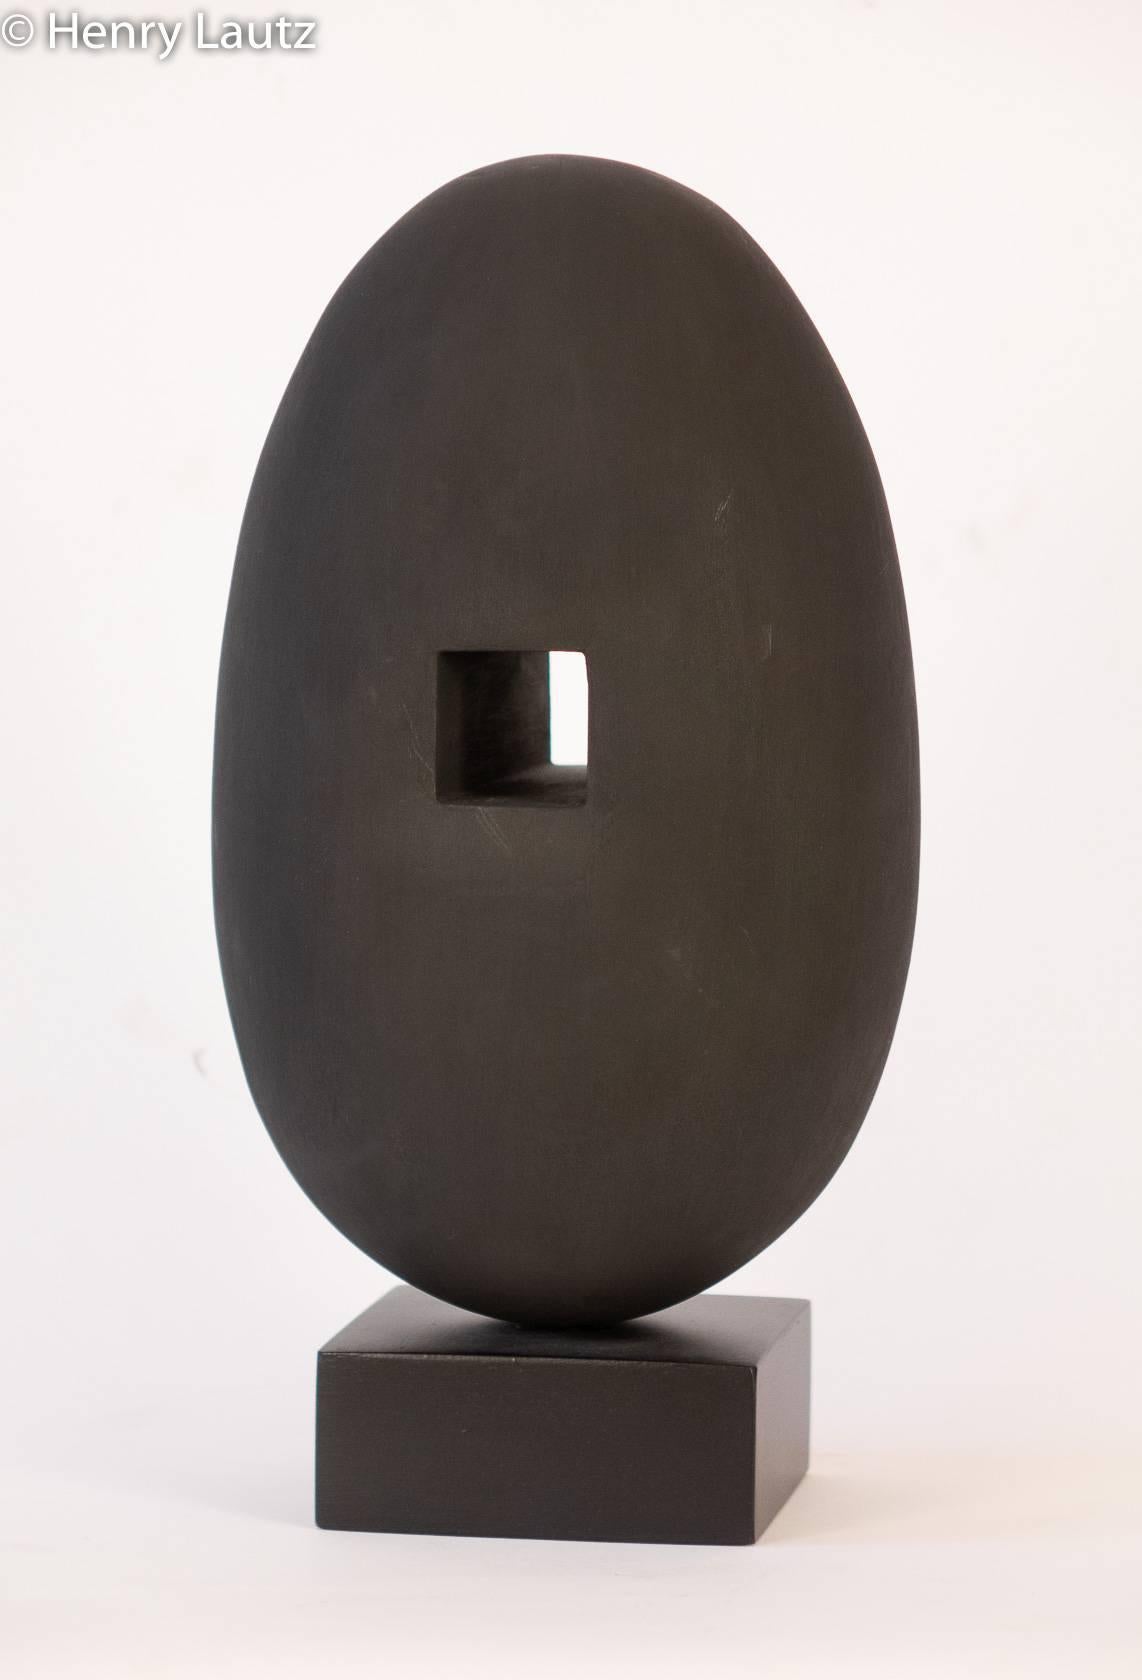 Narmada No.1 - Abstract Sculpture by Henry Lautz